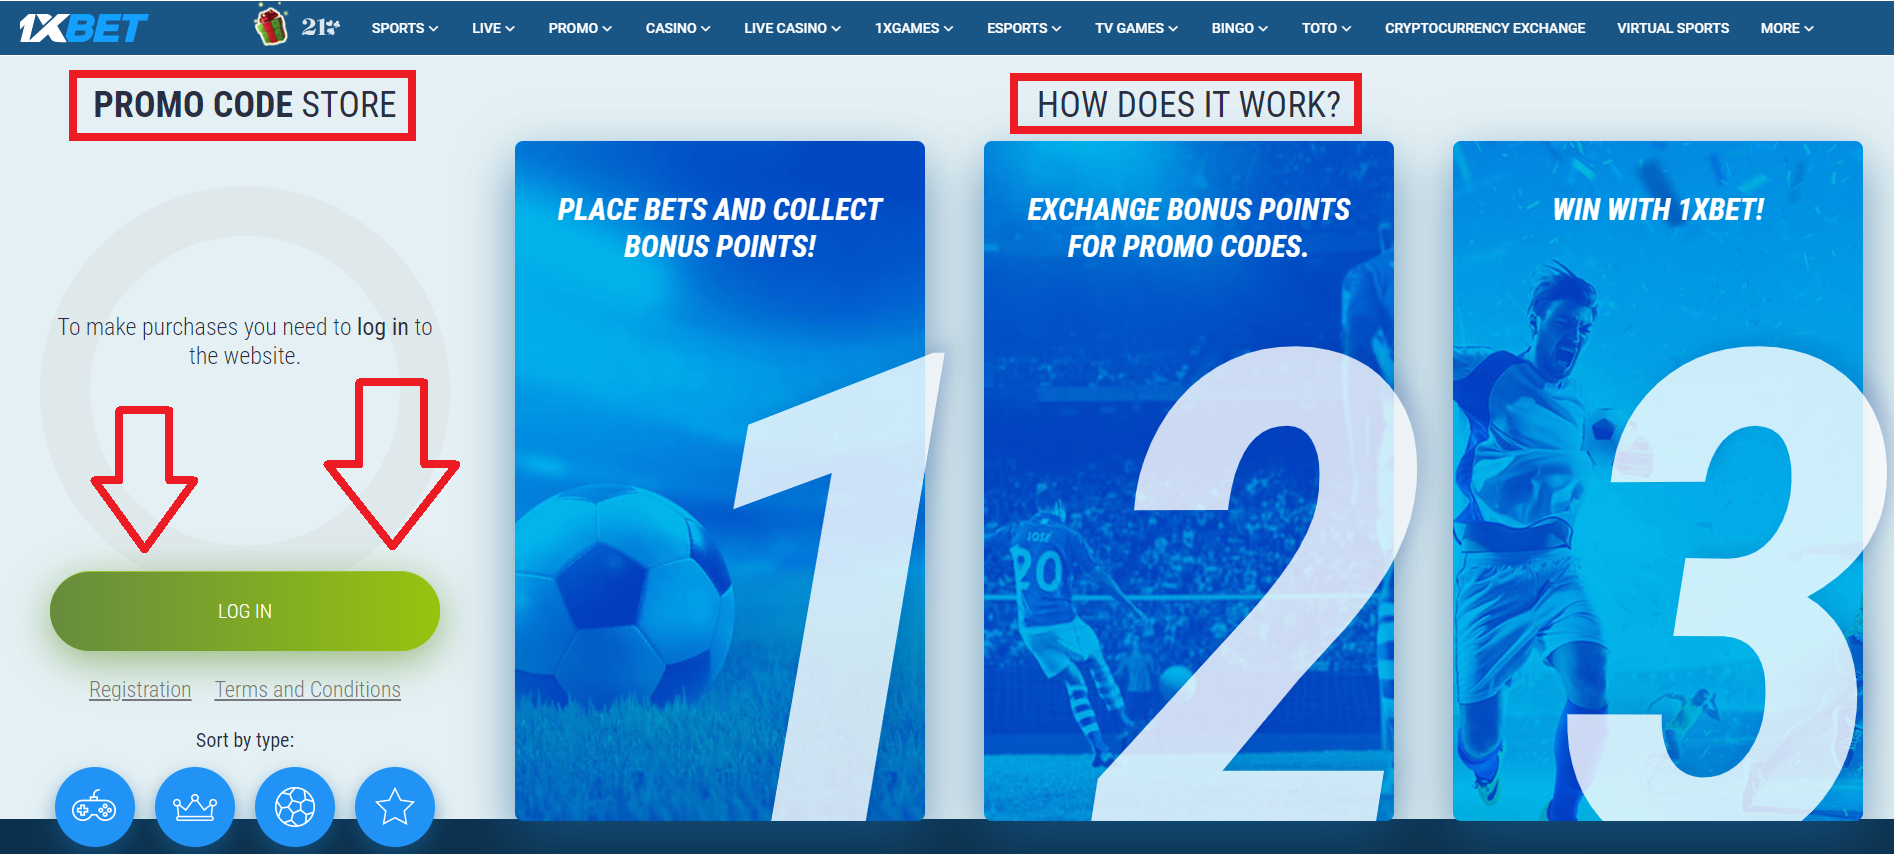 How to use promo code for Kenya users at 1xBet